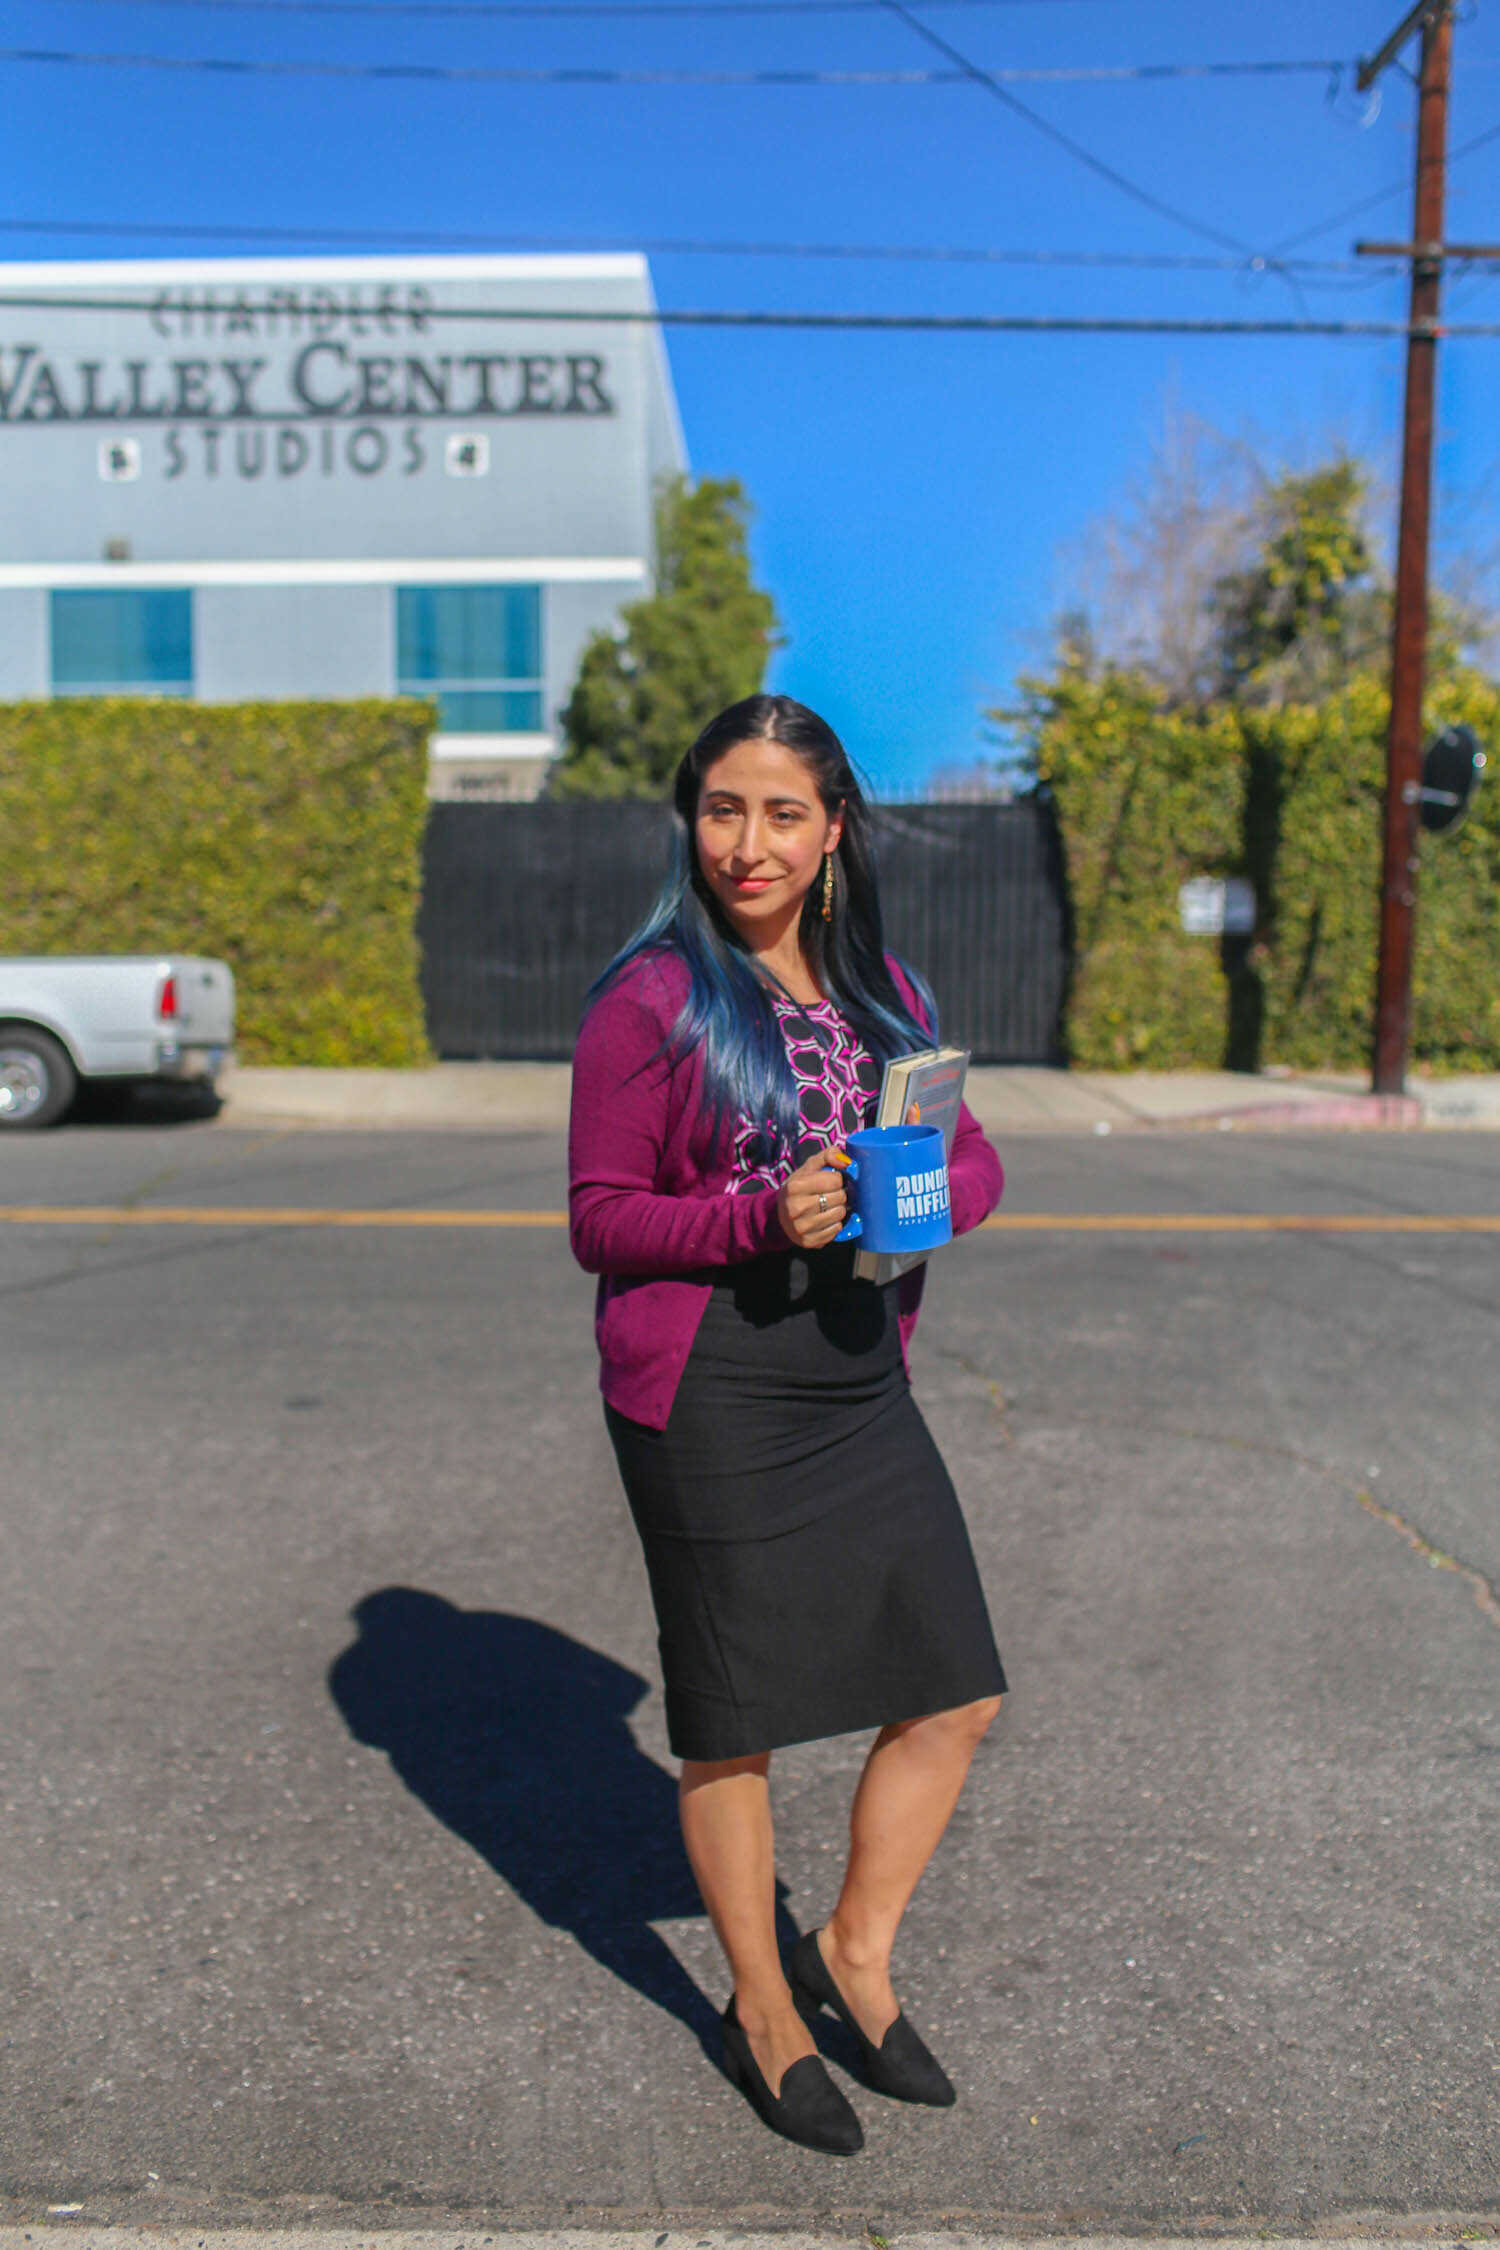 Brianna dressed as Kelly Kapoor in front of the Dunder Mifflin office building in Panorama City.